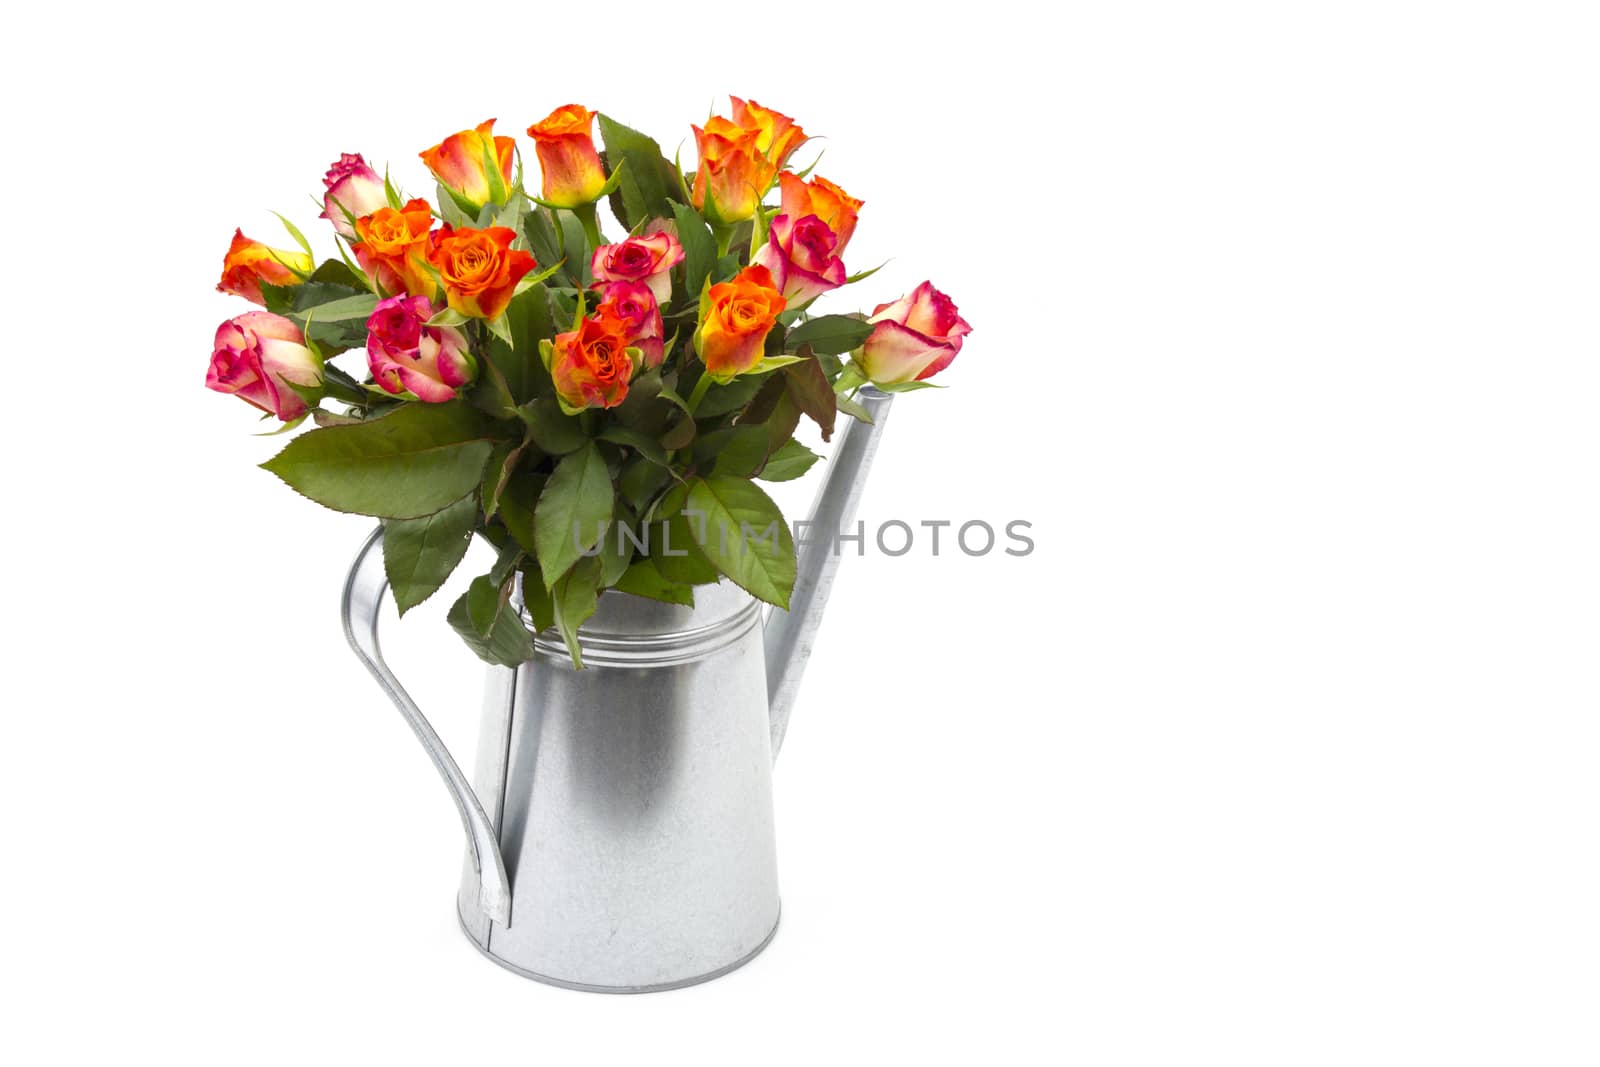 roses in a watering can on white background by miradrozdowski